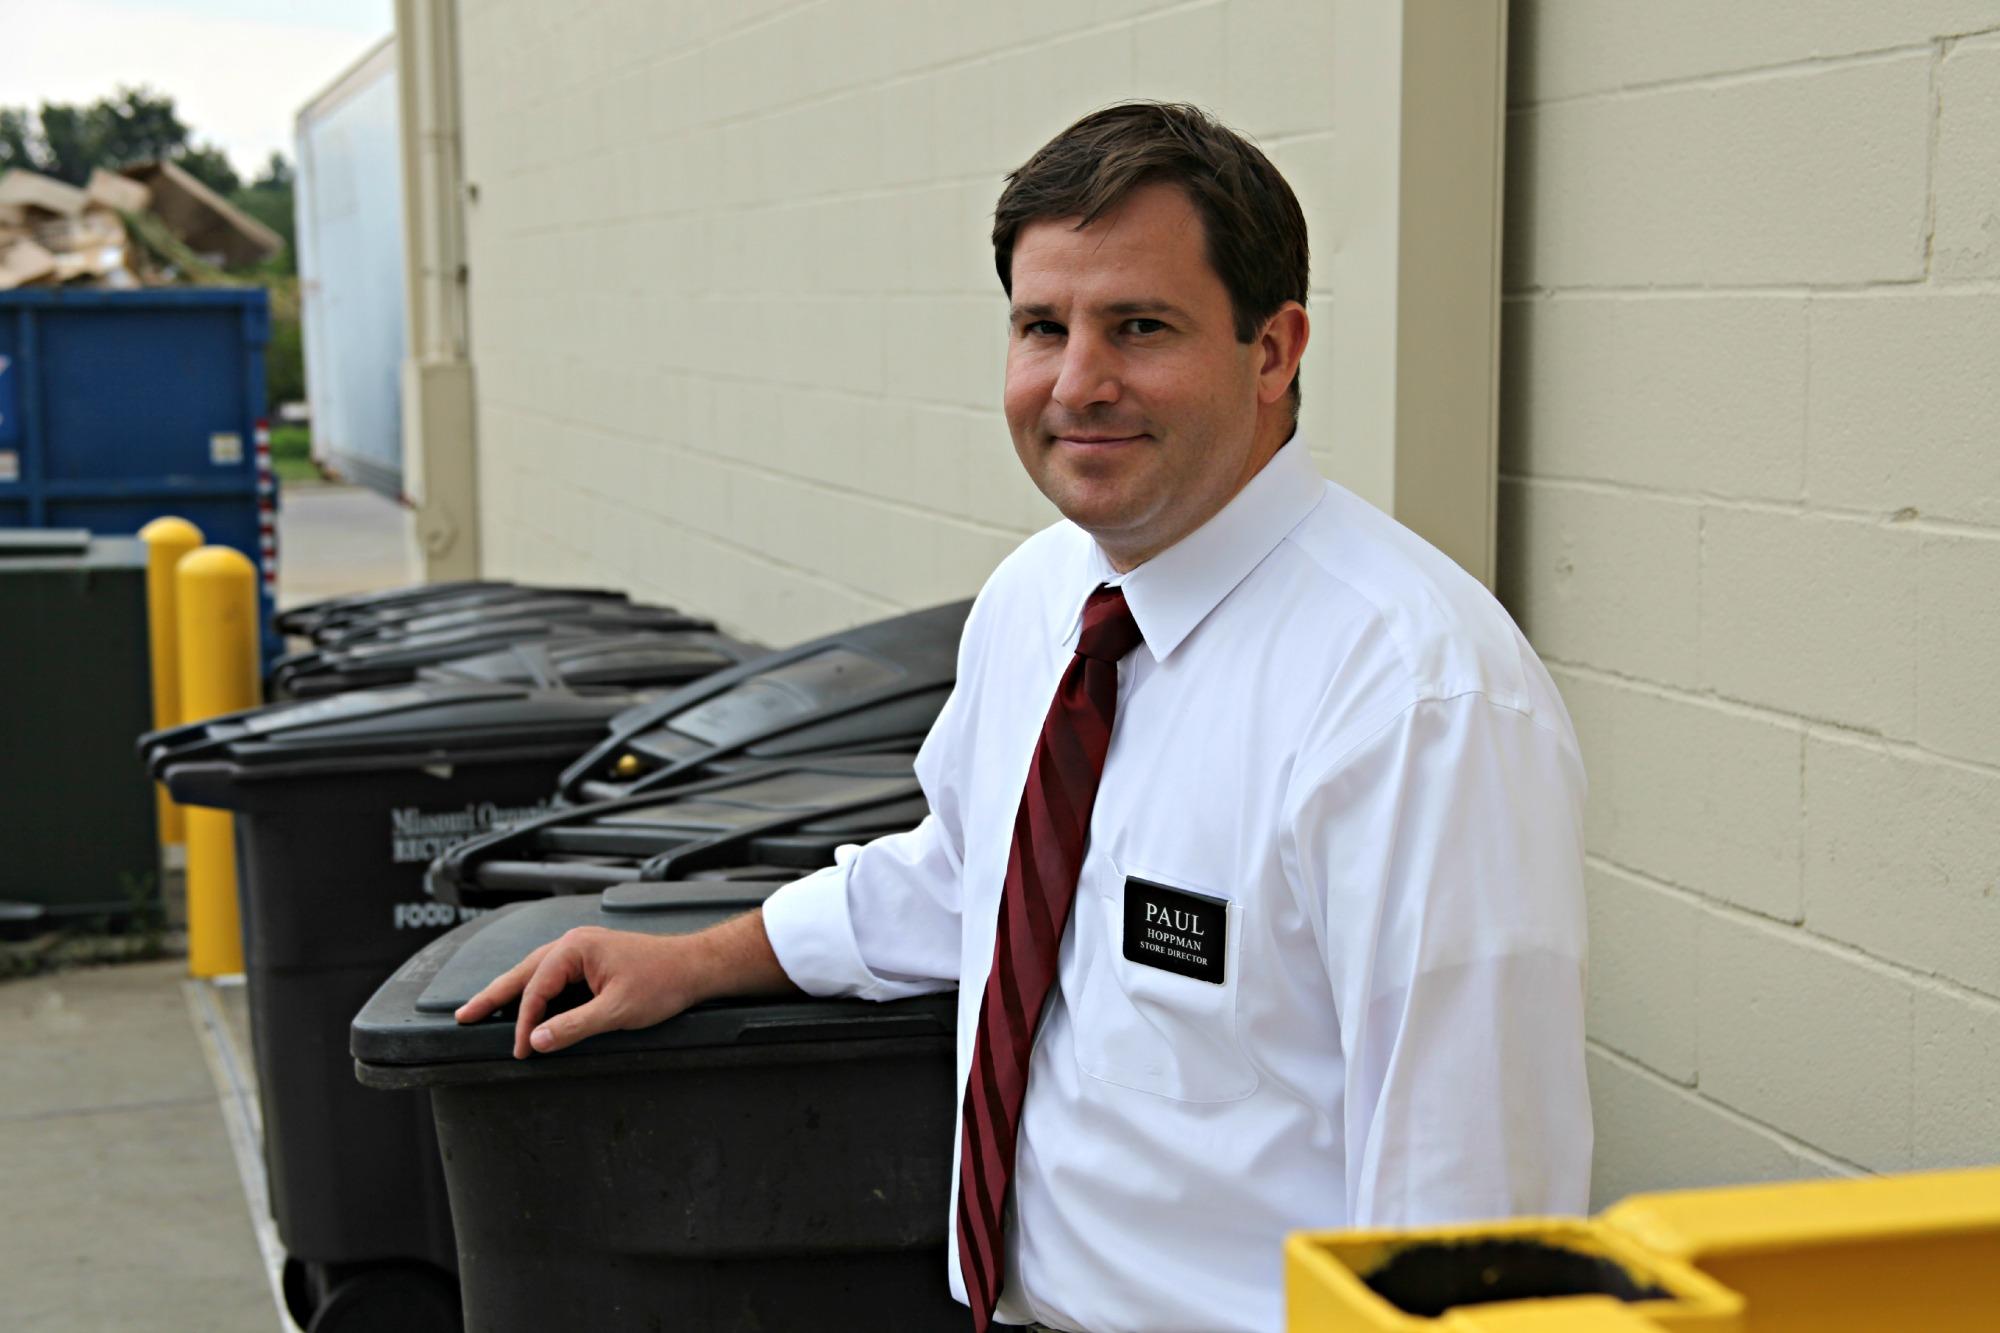 Paul Hoppman, director of a Hy-Vee grocery store in Independence, Mo., owns ten compost bins that get picked up three times a week. Composting has helped his store reduce the amount of food waste it was sending to the landfill.